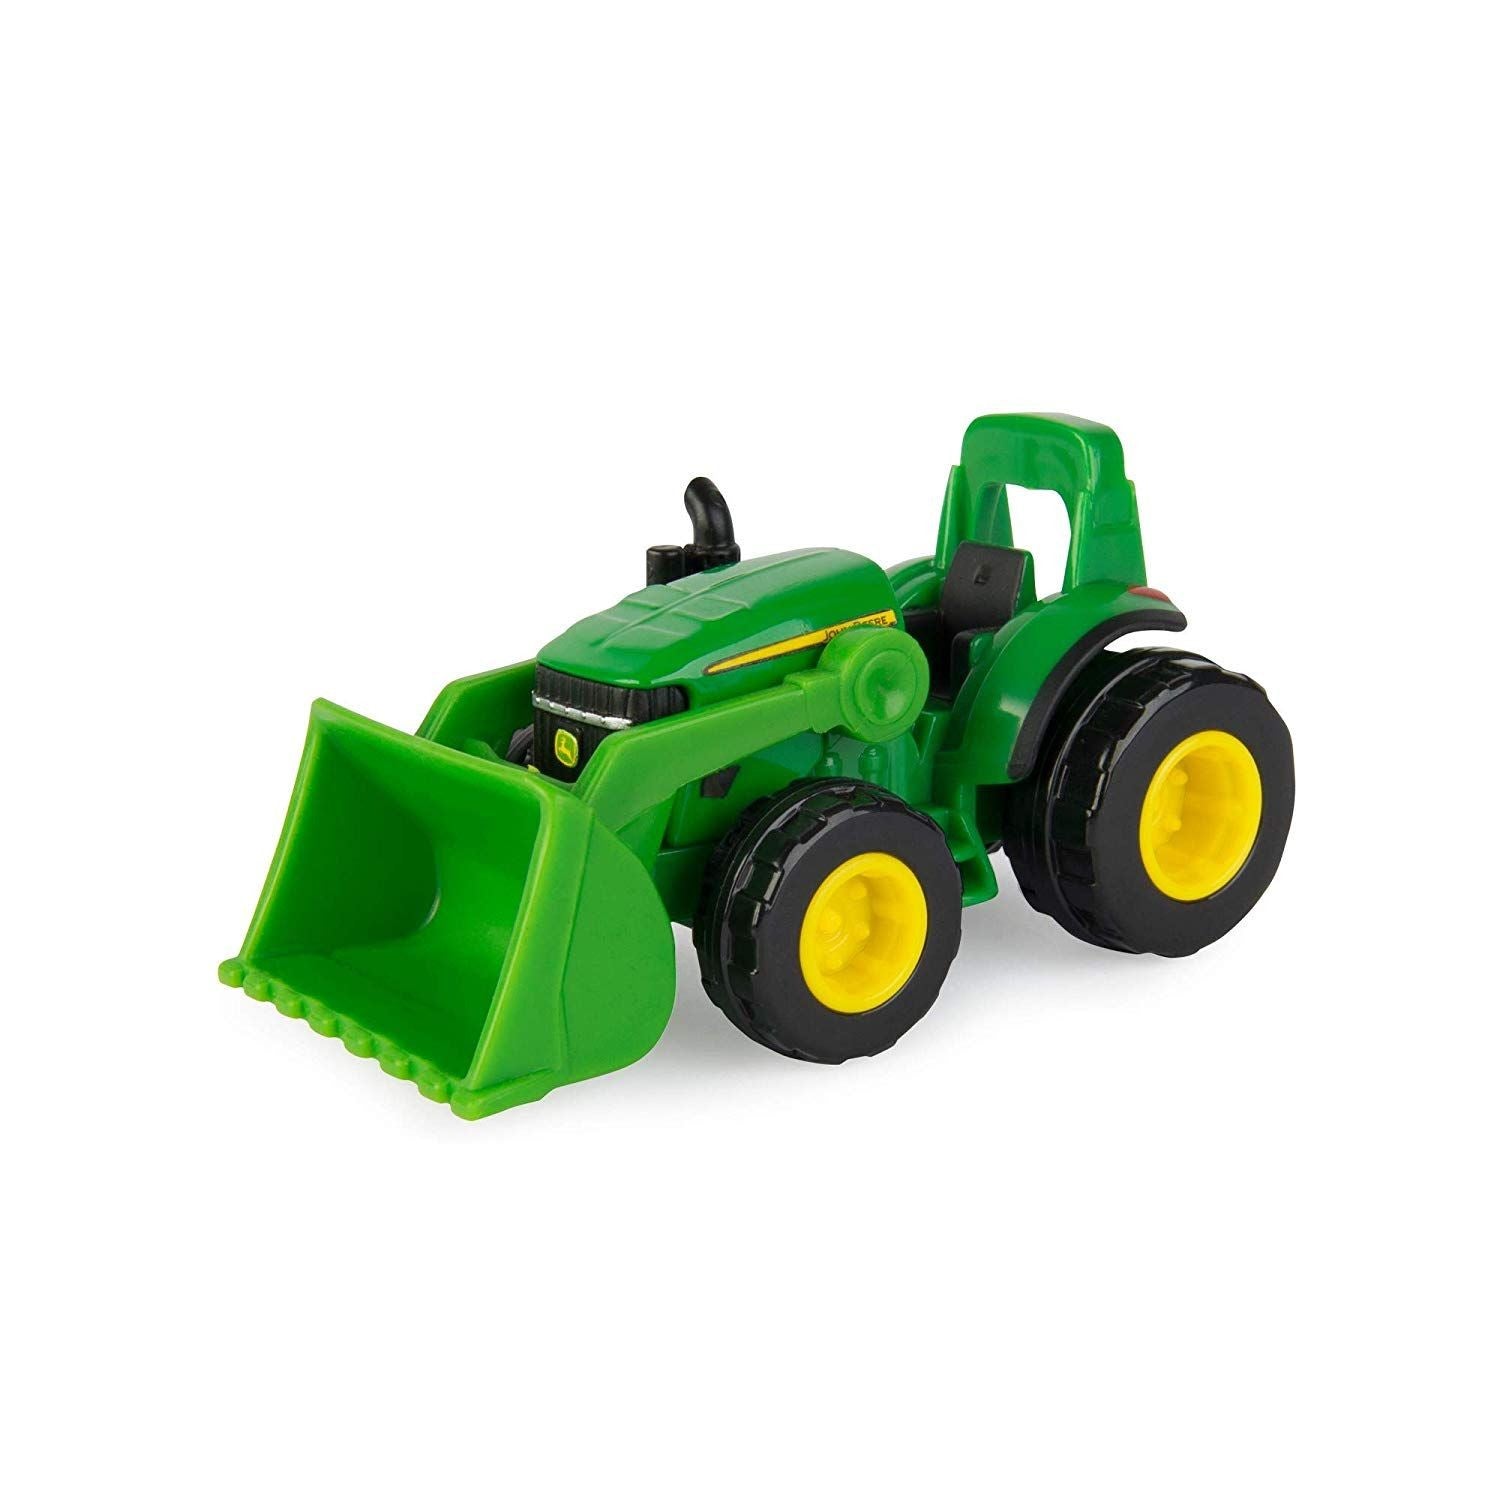 ERTL John Deere Mighty Movers Toy Tractor with Loader